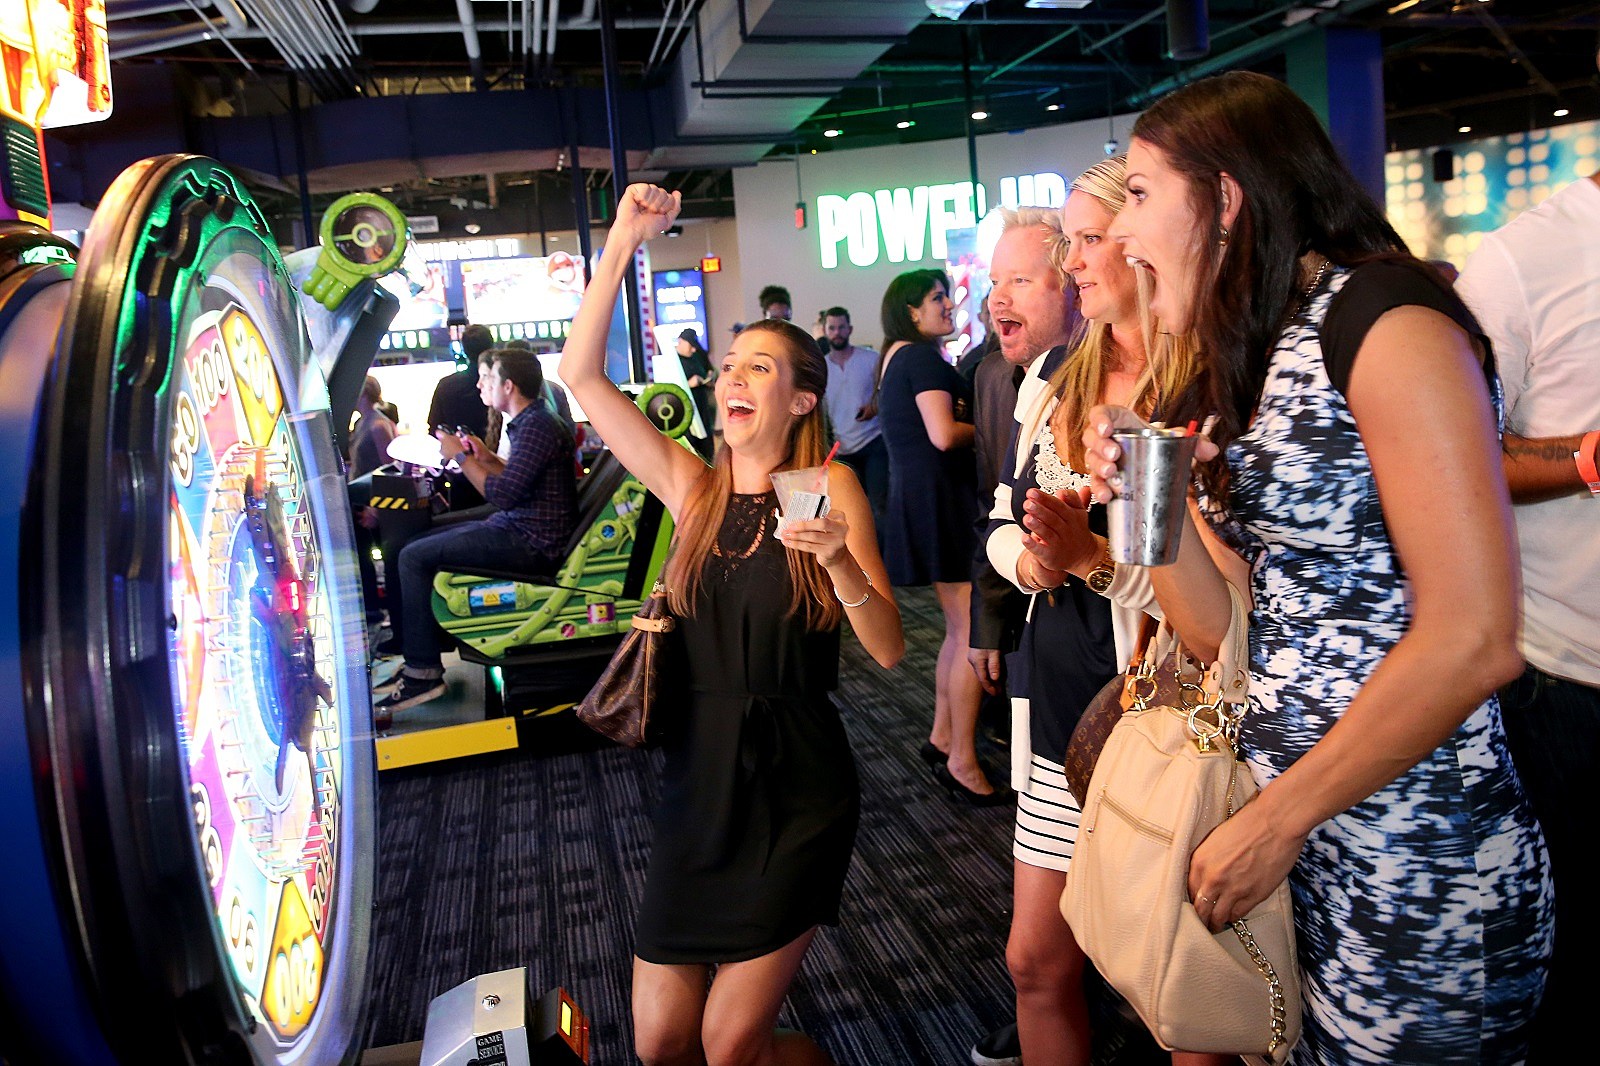 Dave & Buster's opens its first location in Iowa on July 31